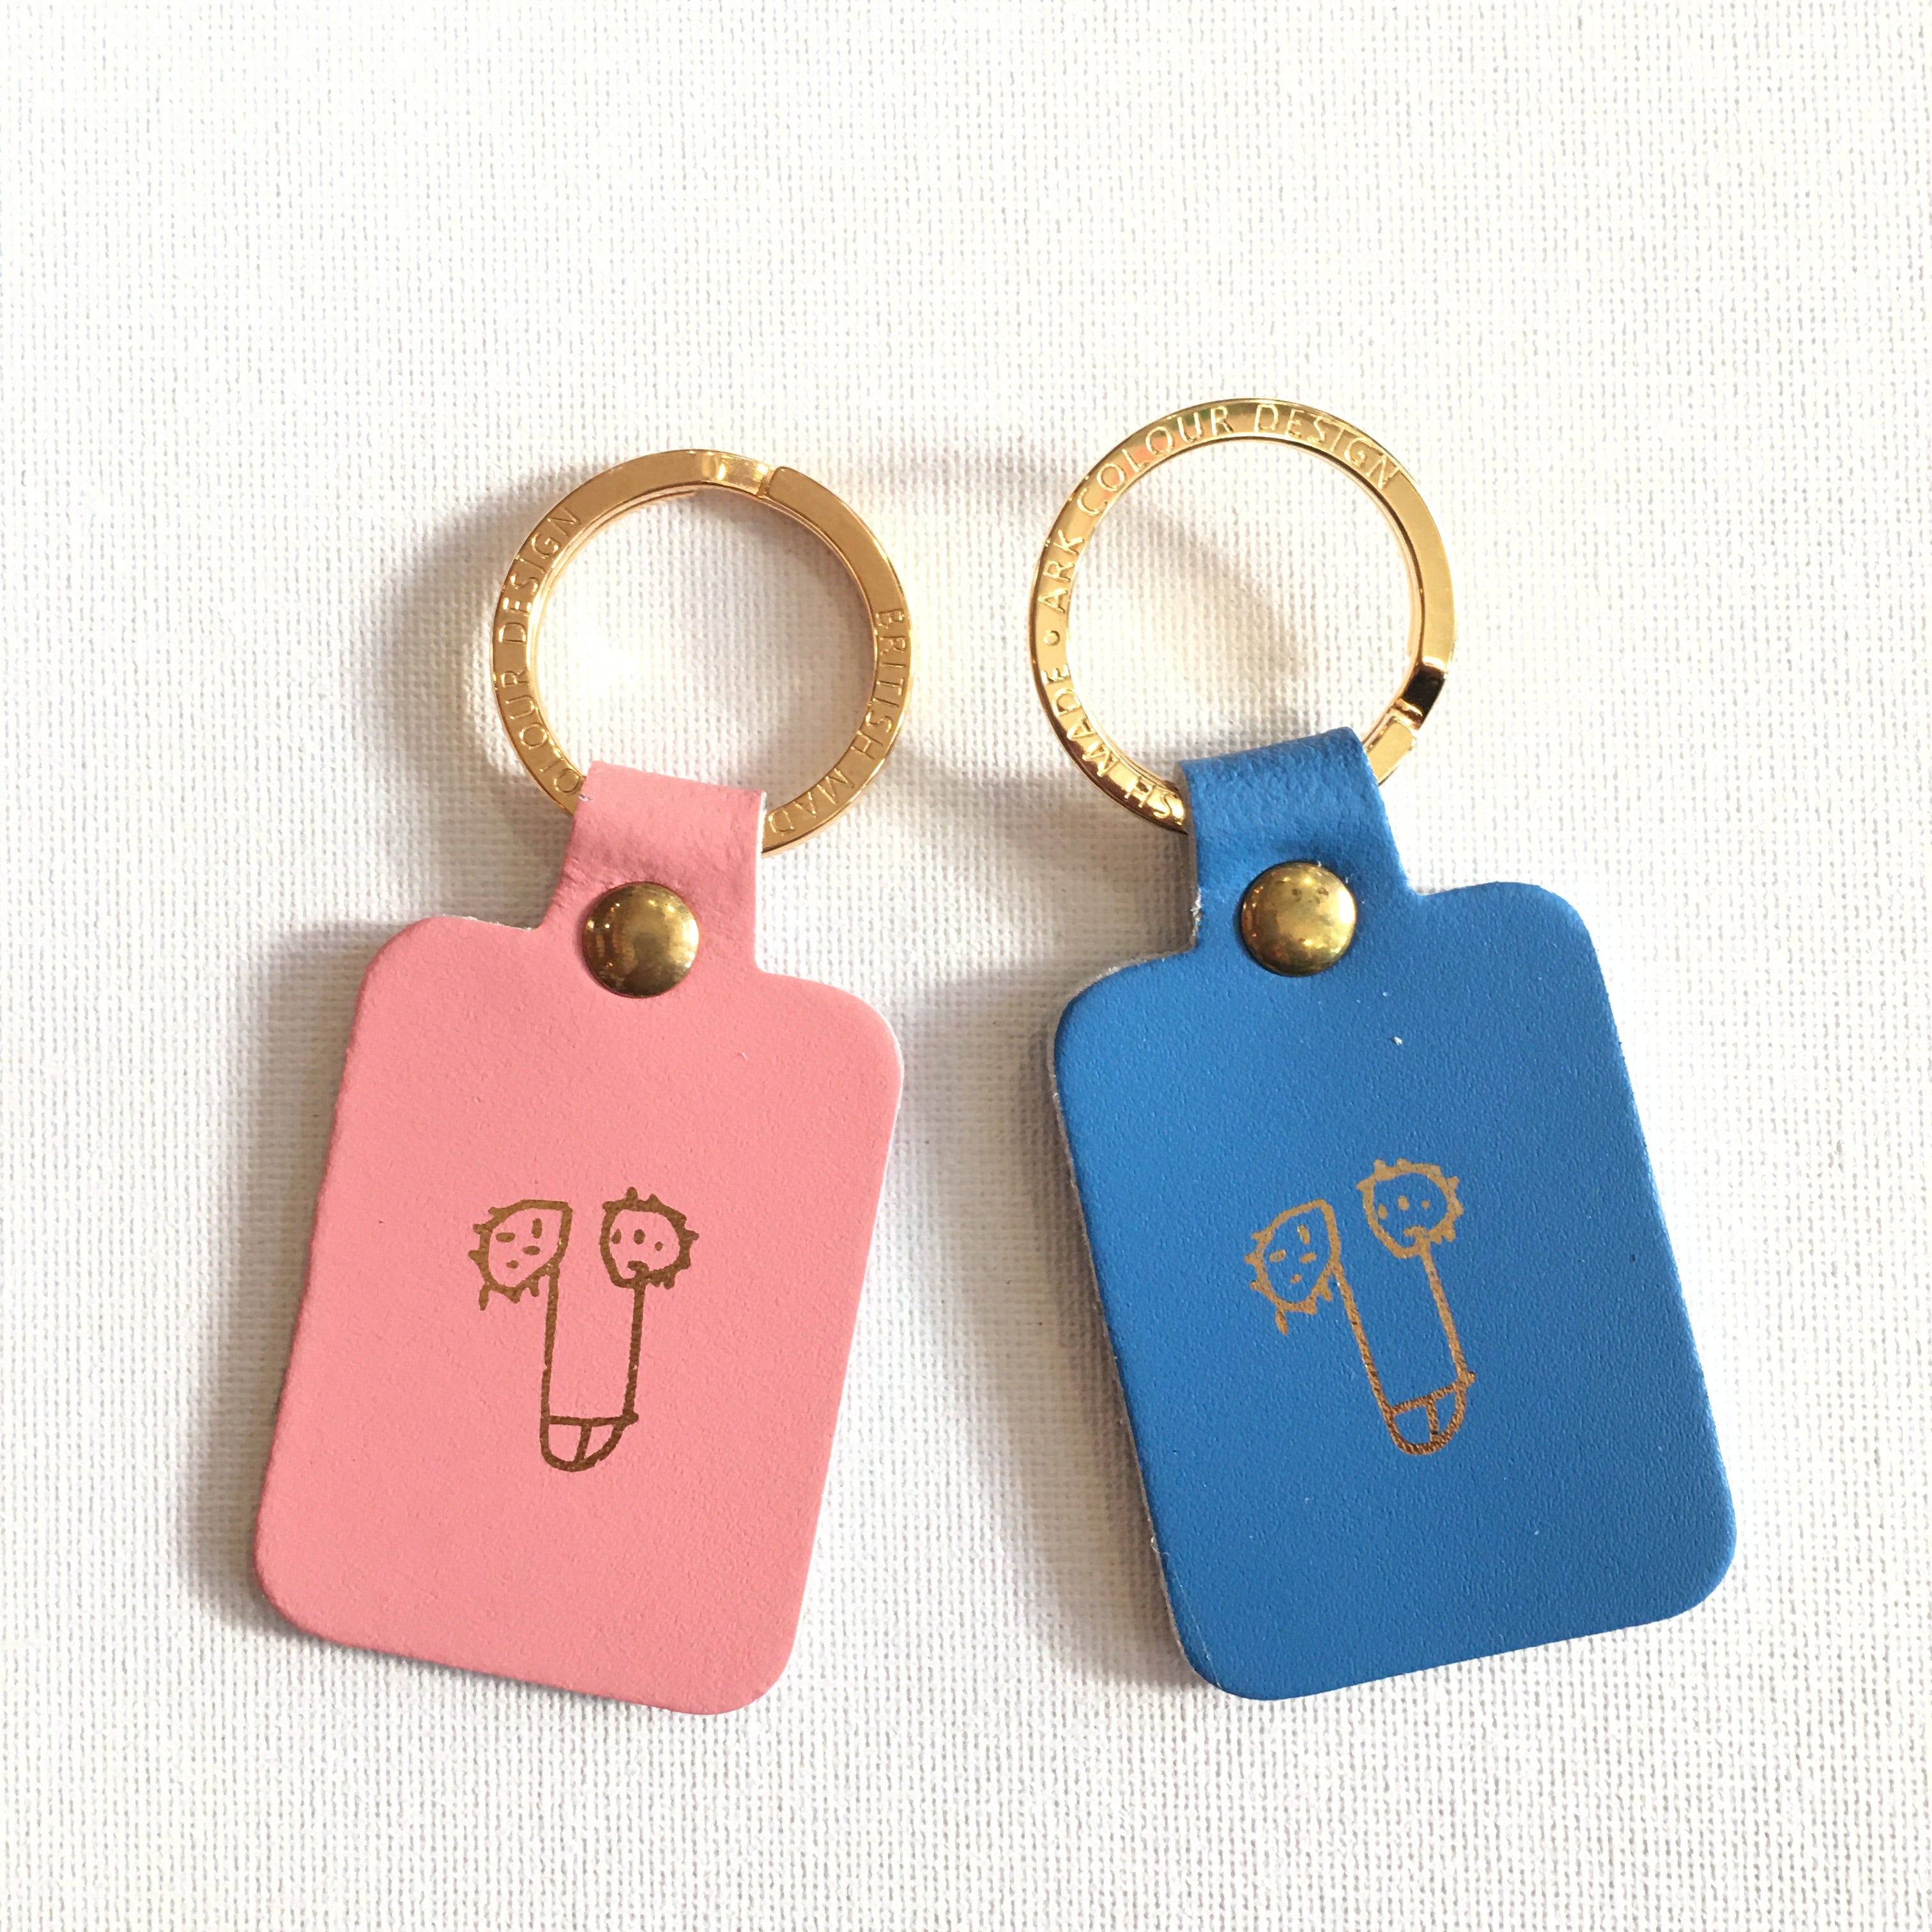 ARK COLOUR DESIGN "WILLY" KEY RINGS/FOBS